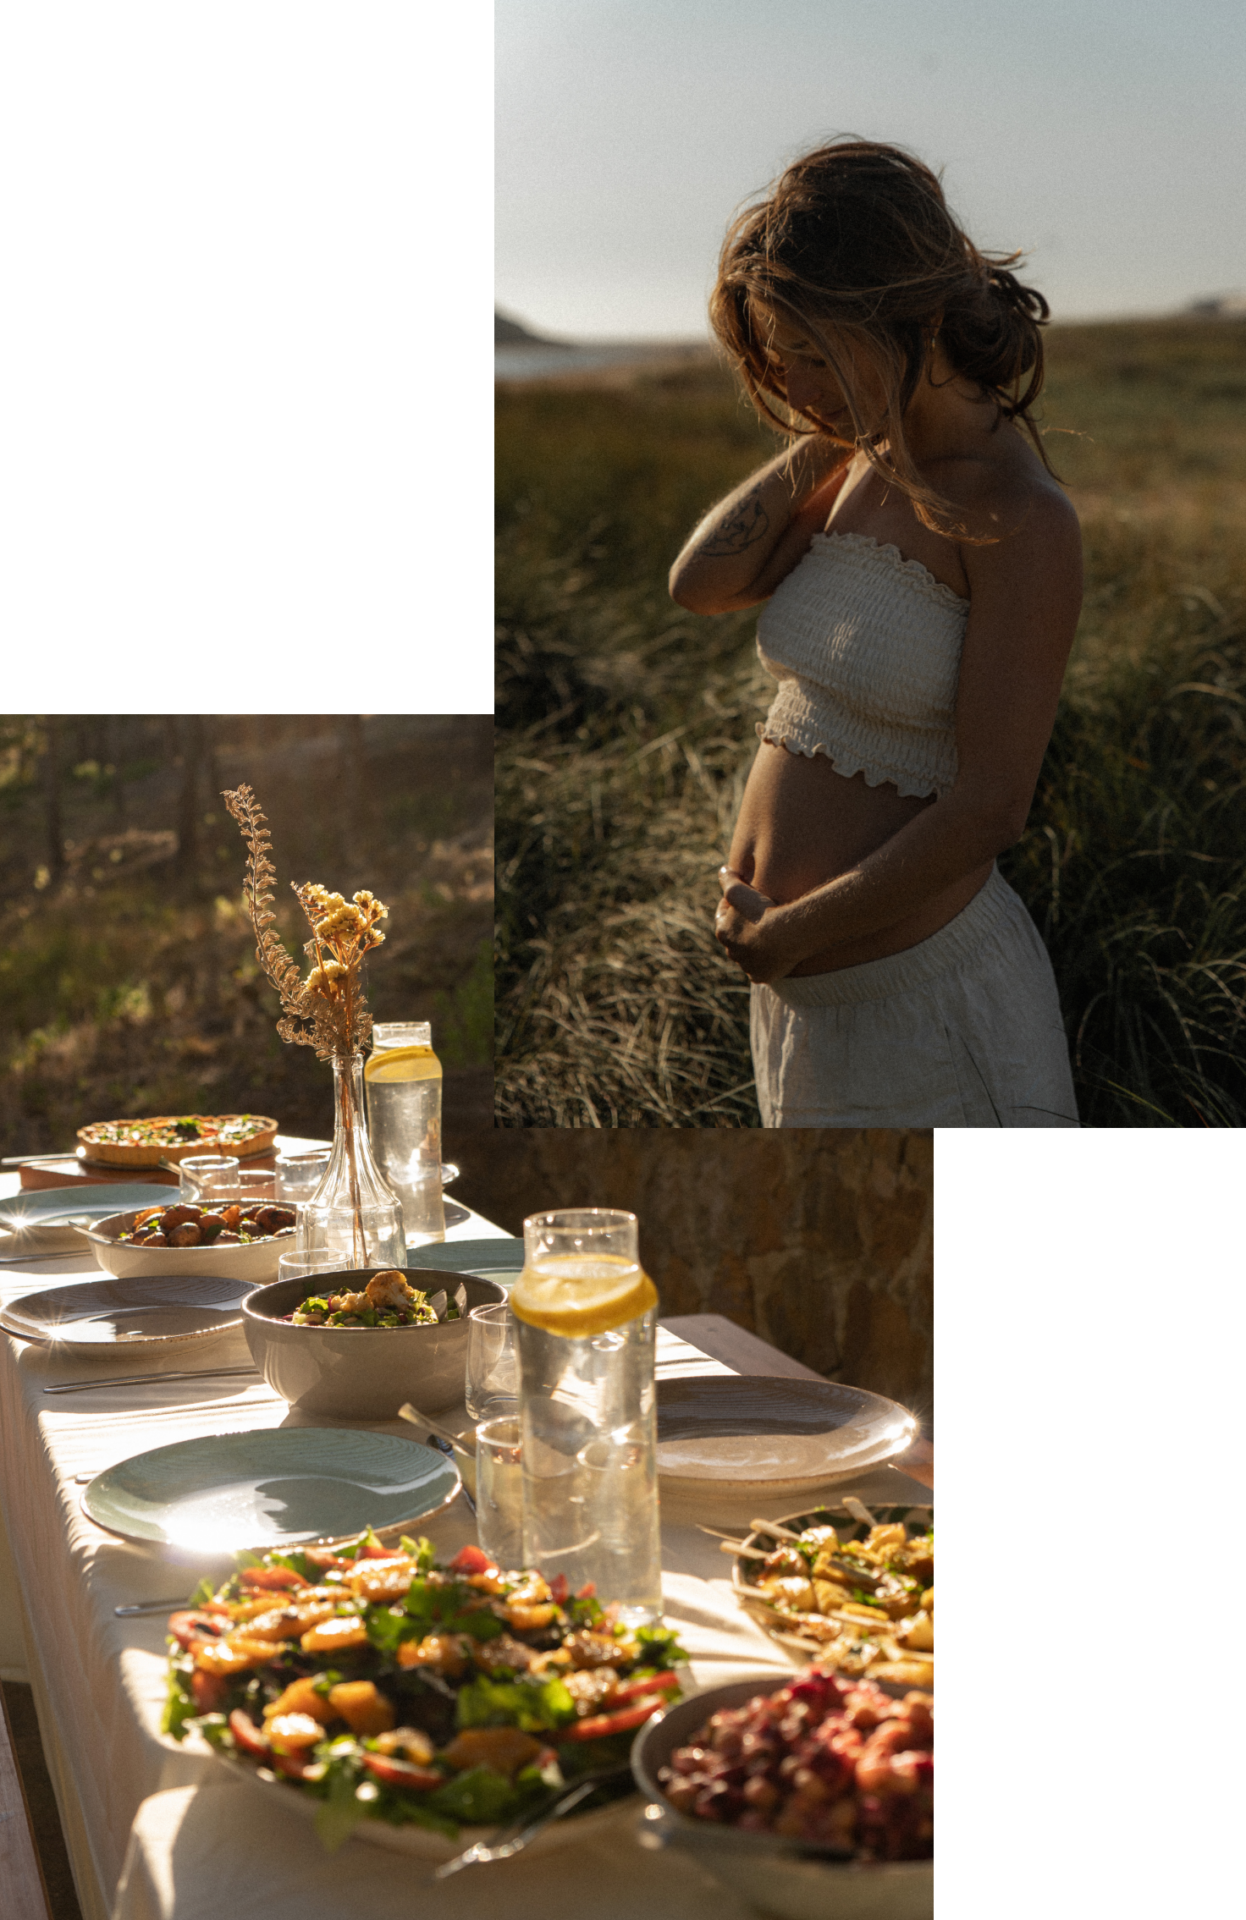 A photo collage of a pregnant yoga teacher holding her belly in the nature and full table of vegan food Photo credits: Selma Rijkhoff and Maximilian Salzer, Wurzelwerkstatt Retreat